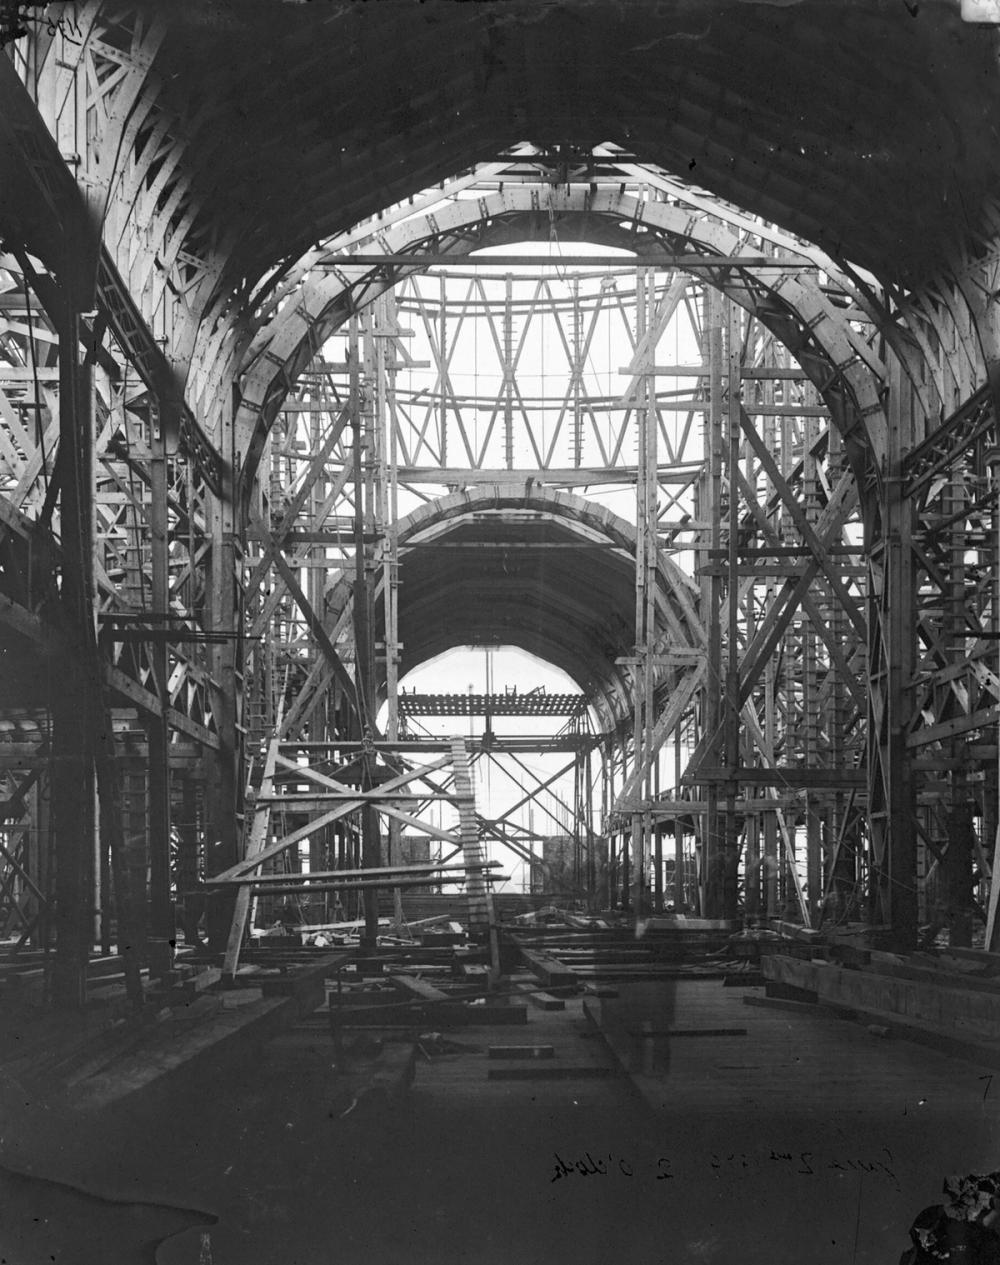 Black and white image of the Sydney International Exhibition being constructed